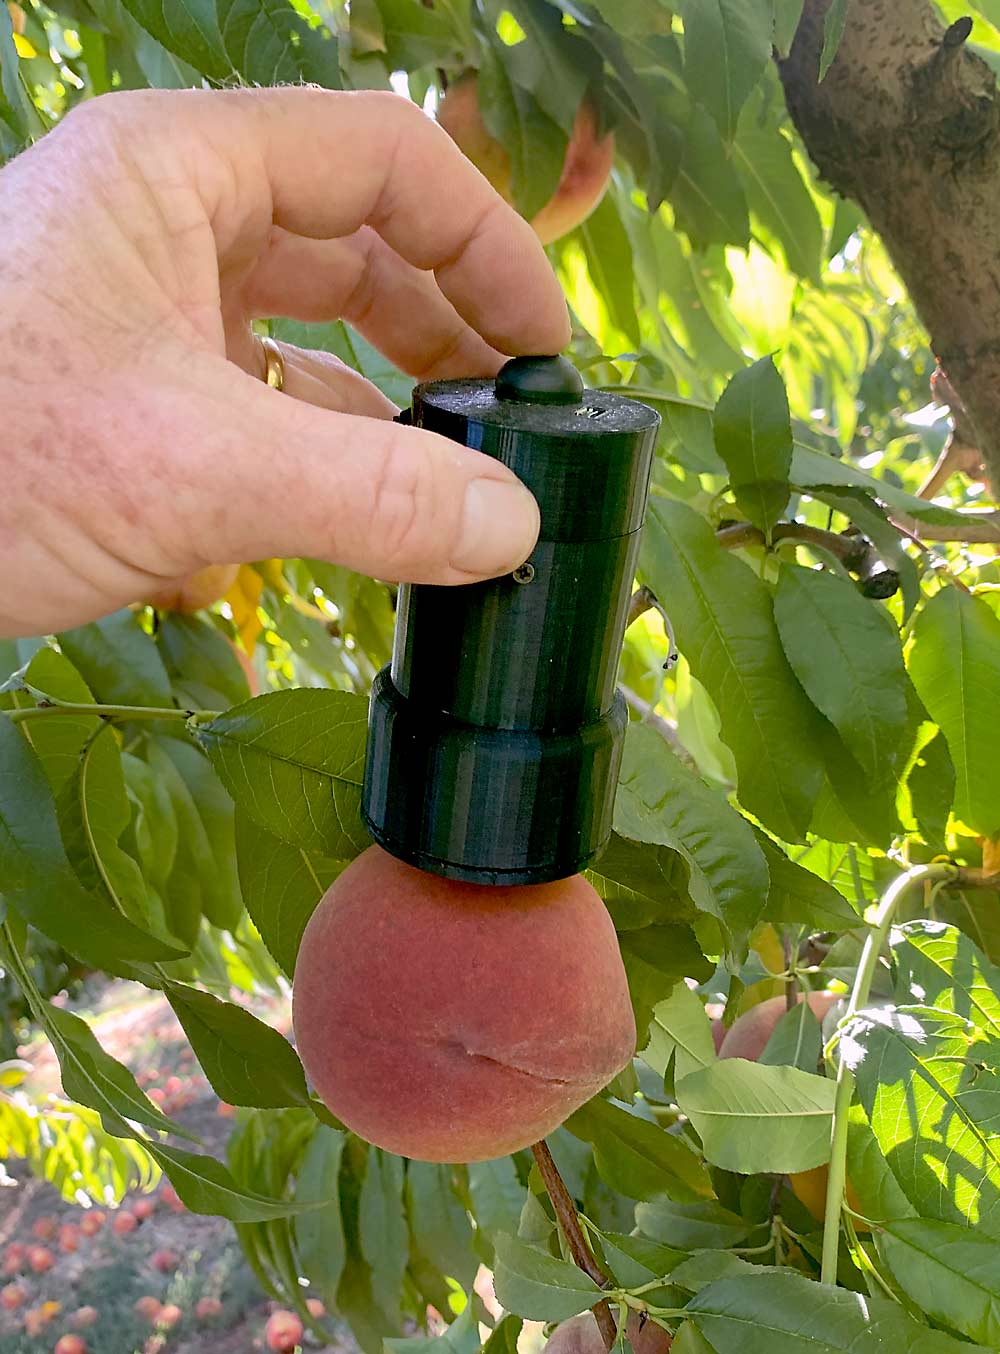 Rubens Technologies of Melbourne, Australia, is developing hand-held sensor spectrometer devices that use reflected light and fluorescence to measure maturity, sweetness and color of fruit on the tree. This sensor is designed to detect color. (Courtesy Agriculture Victoria.)